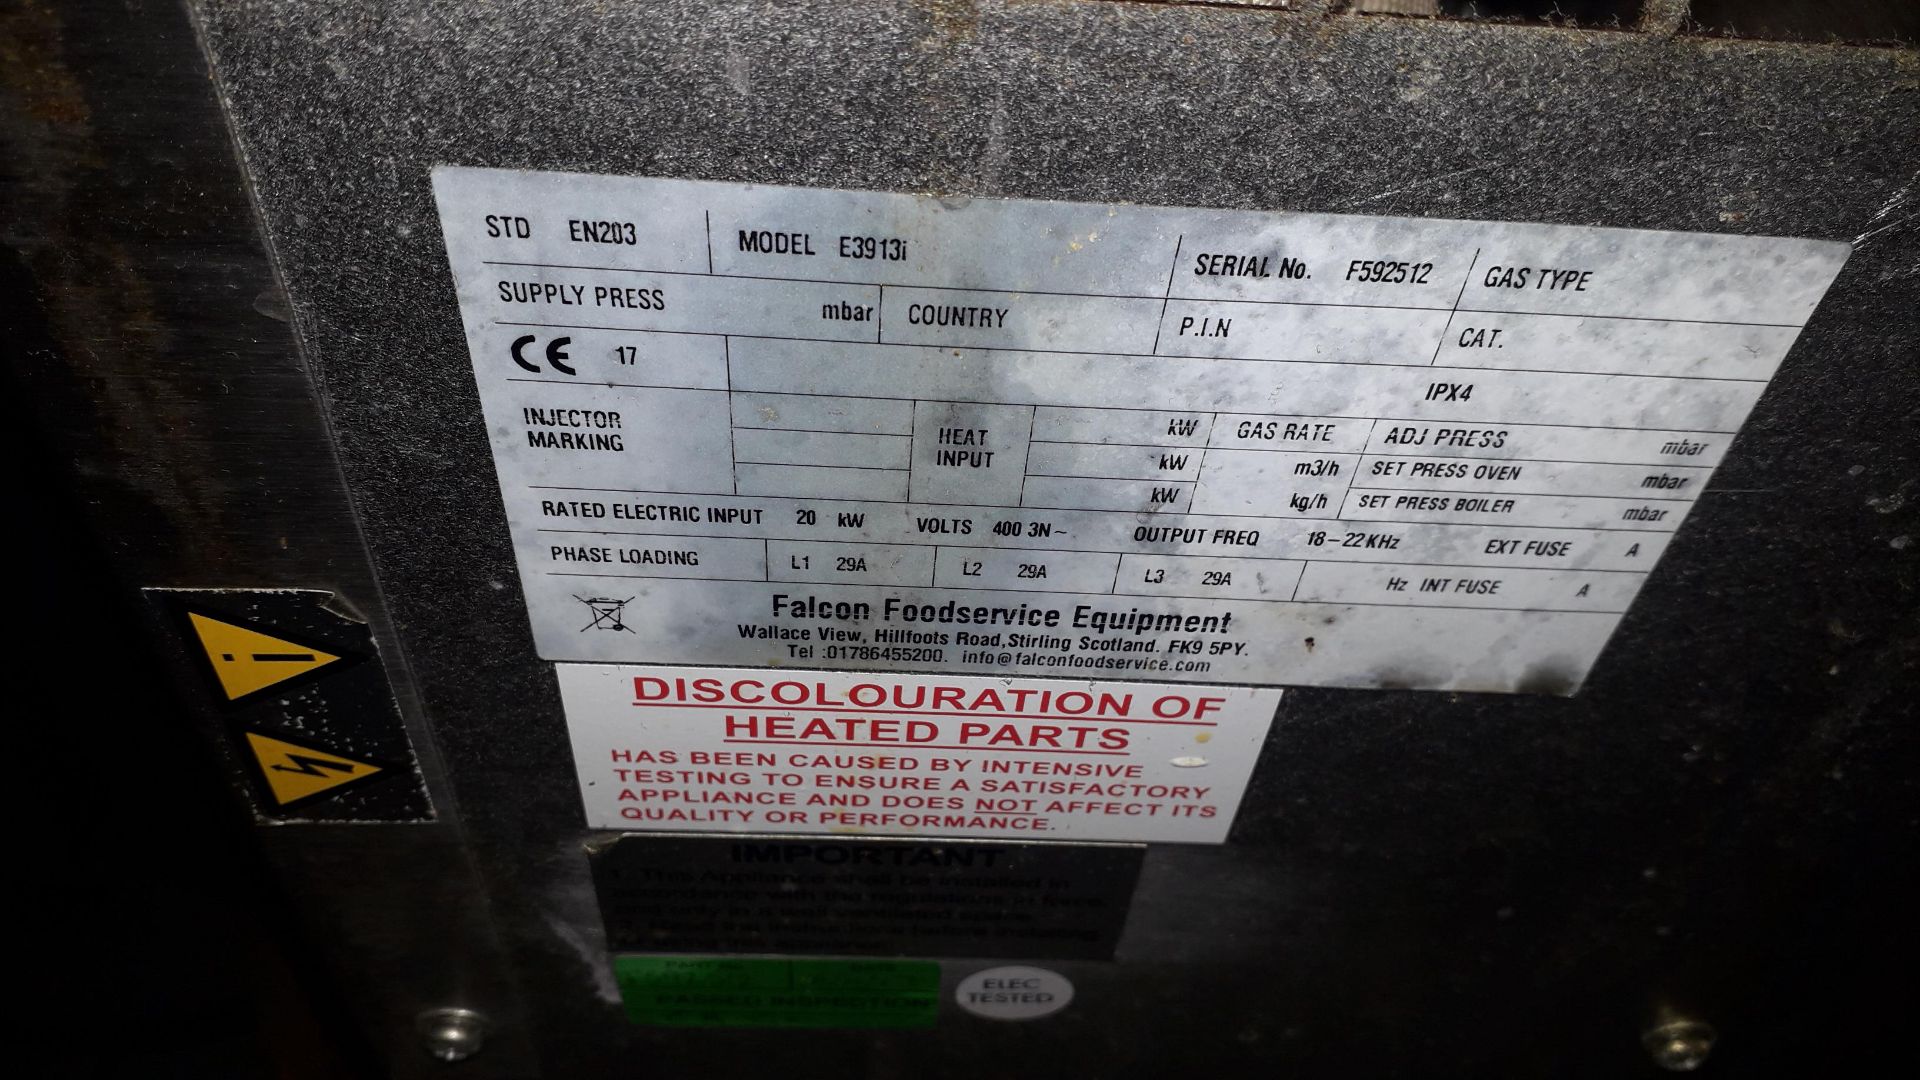 Falcon E3913i Dominator Plus Induction Oven Serial Number F592512 415v, Located at First Floor, - Image 4 of 5